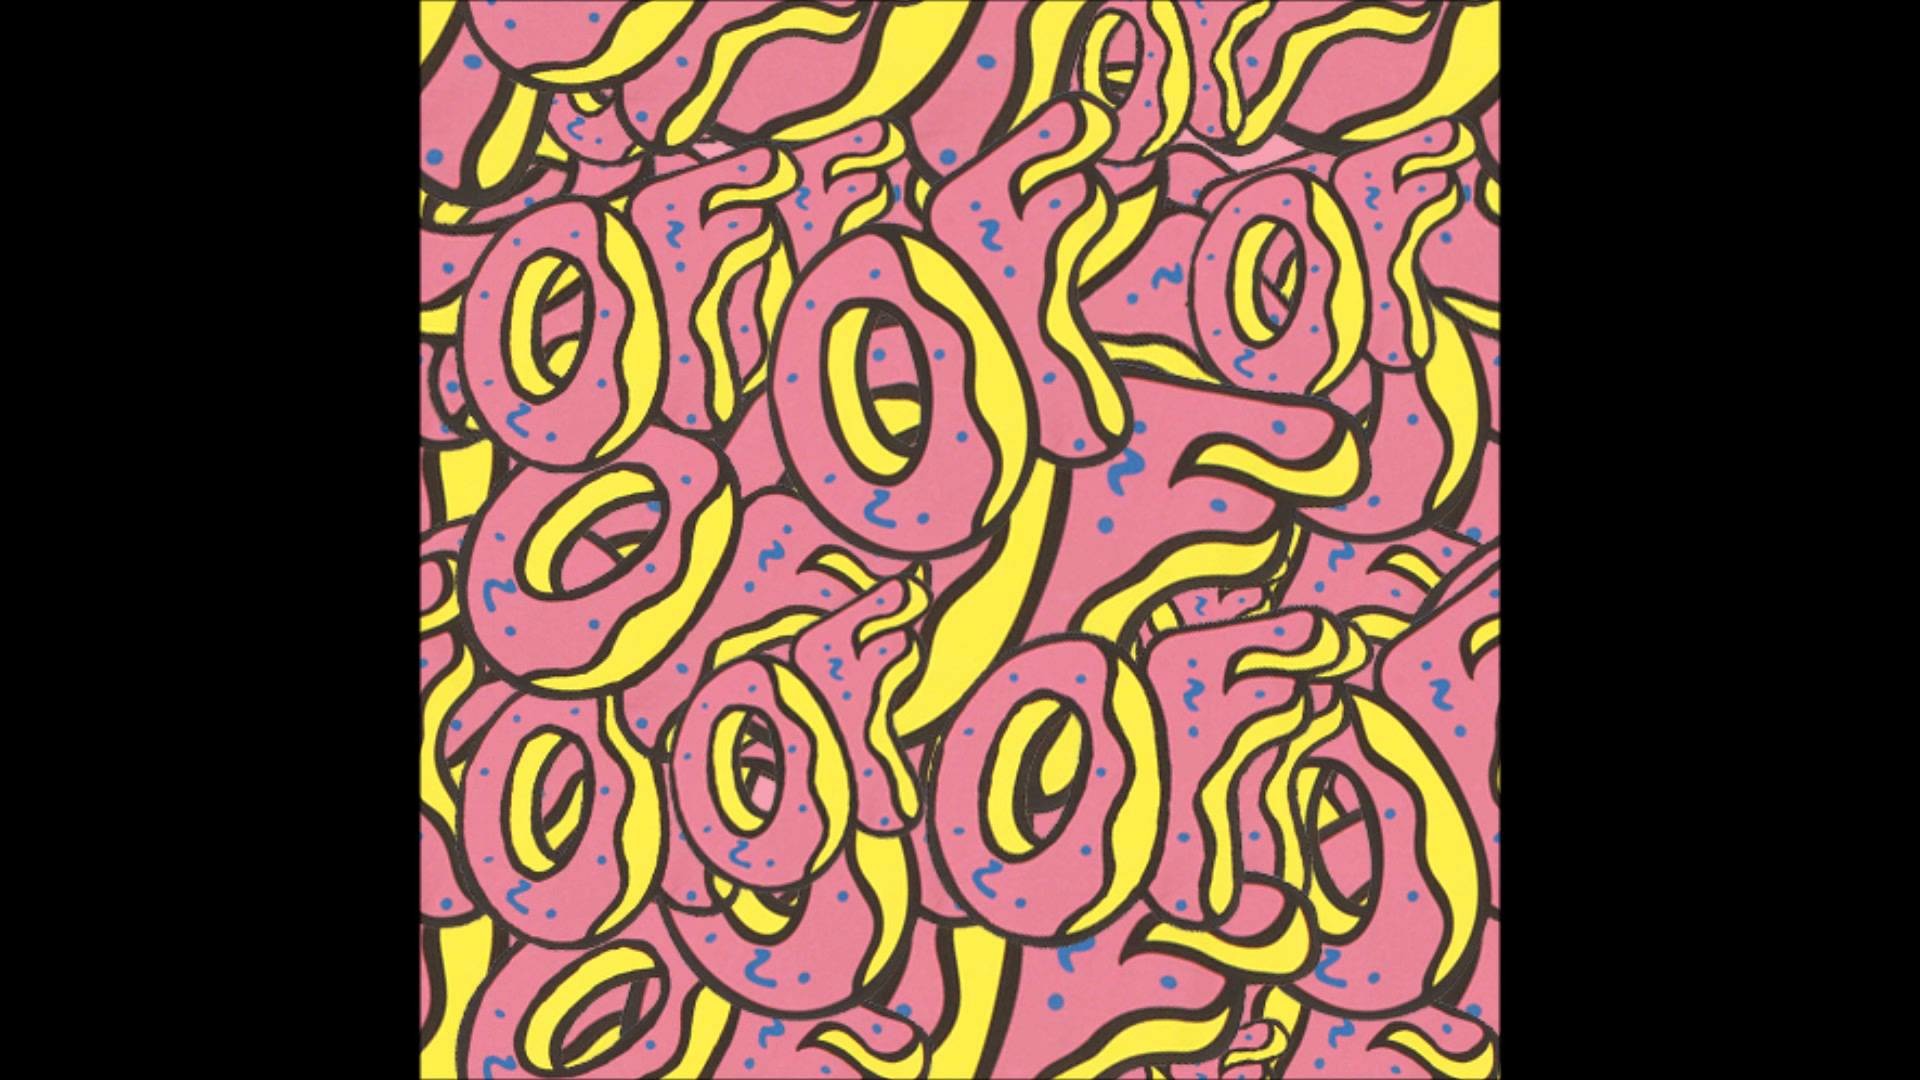 1920x1080 Displaying 15> Images For - Odd Future Donut Wallpaper.